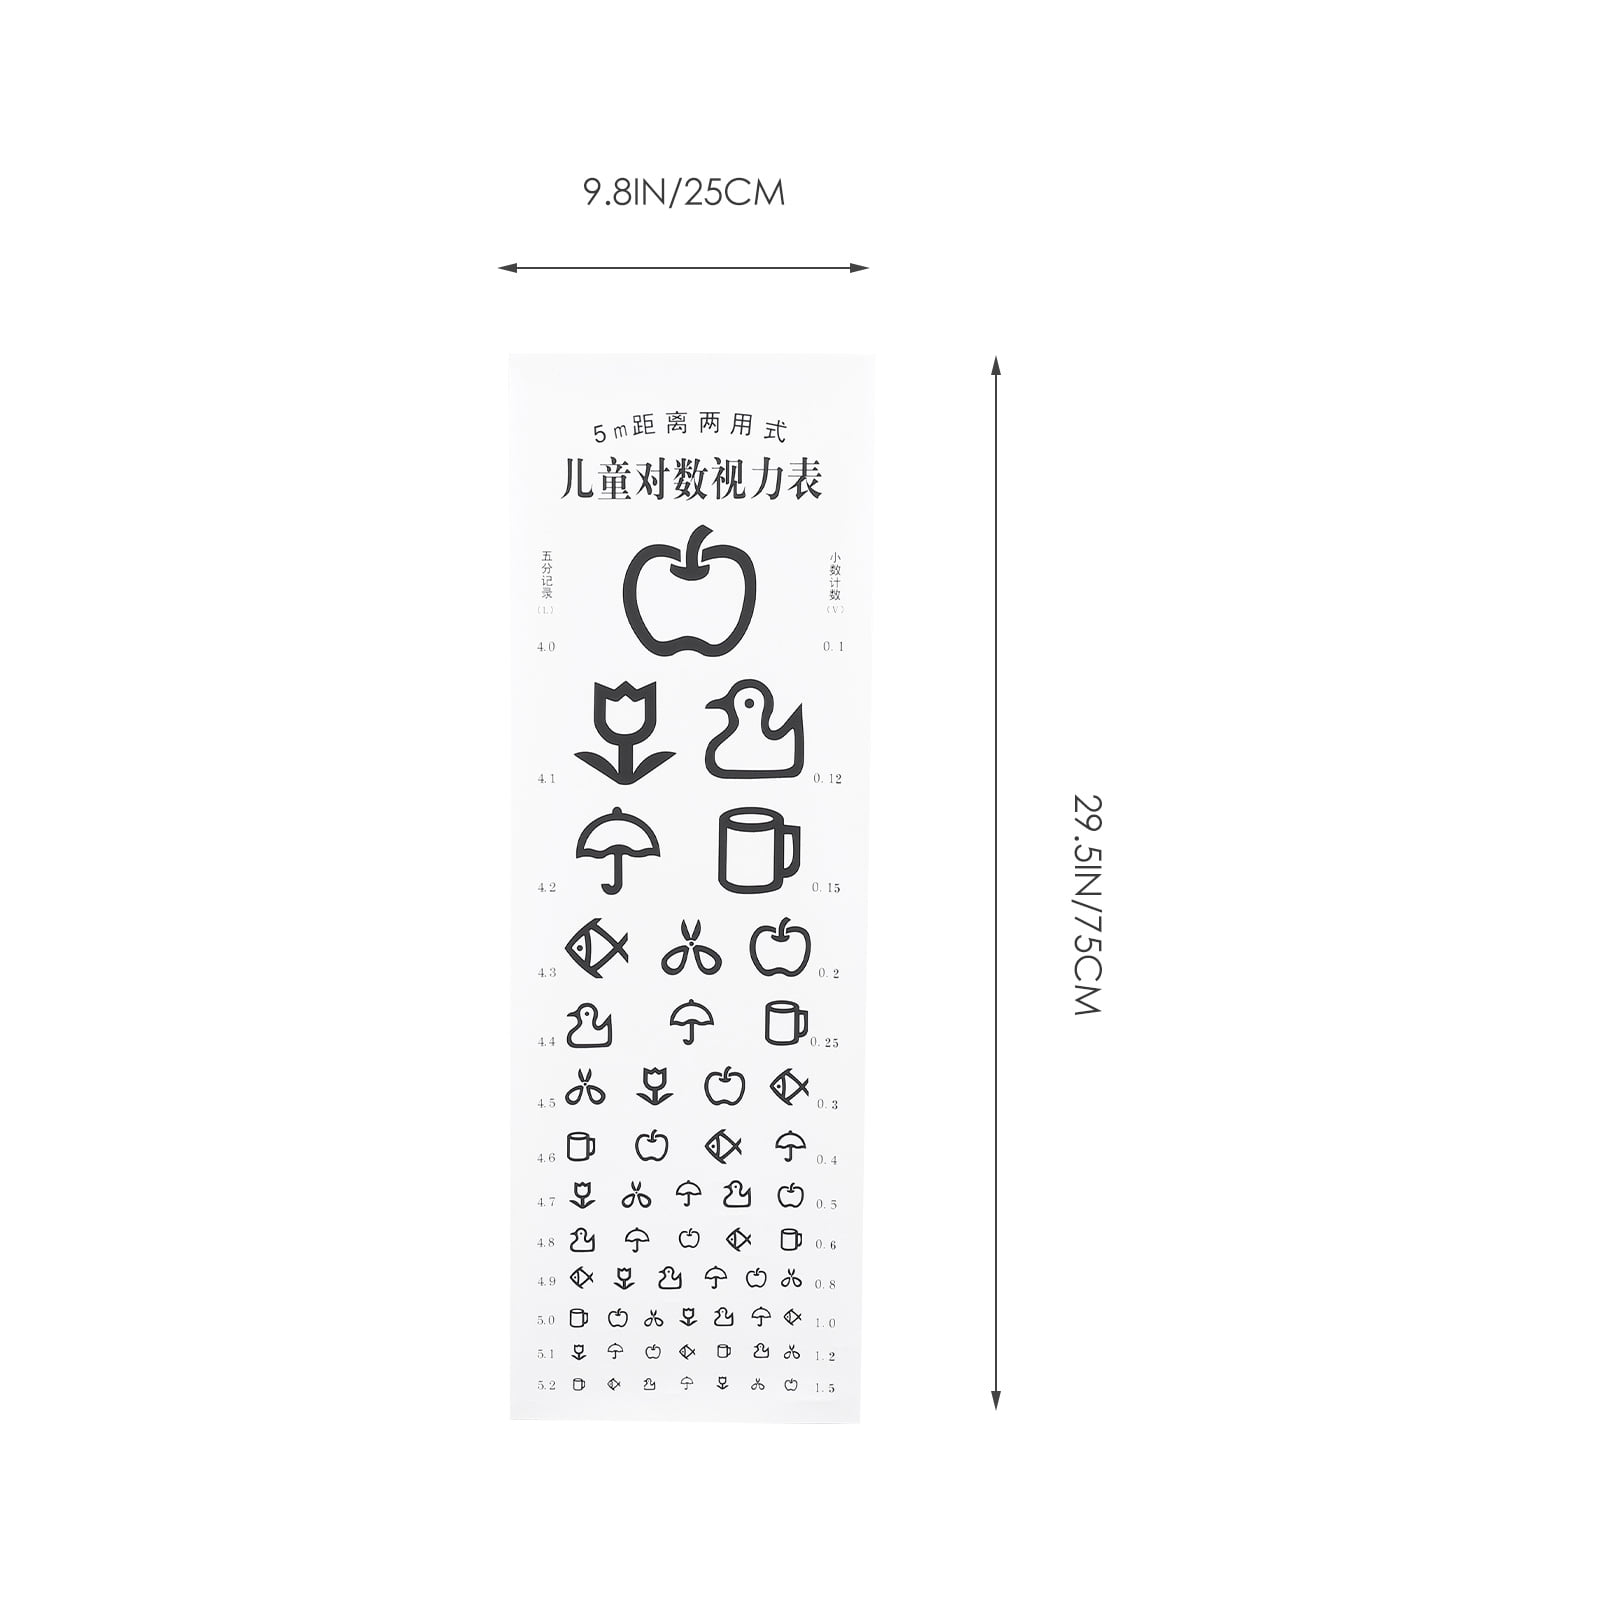 Amsler Grid Instructions-Contact Lens & EyeCare Gallery-2144232020